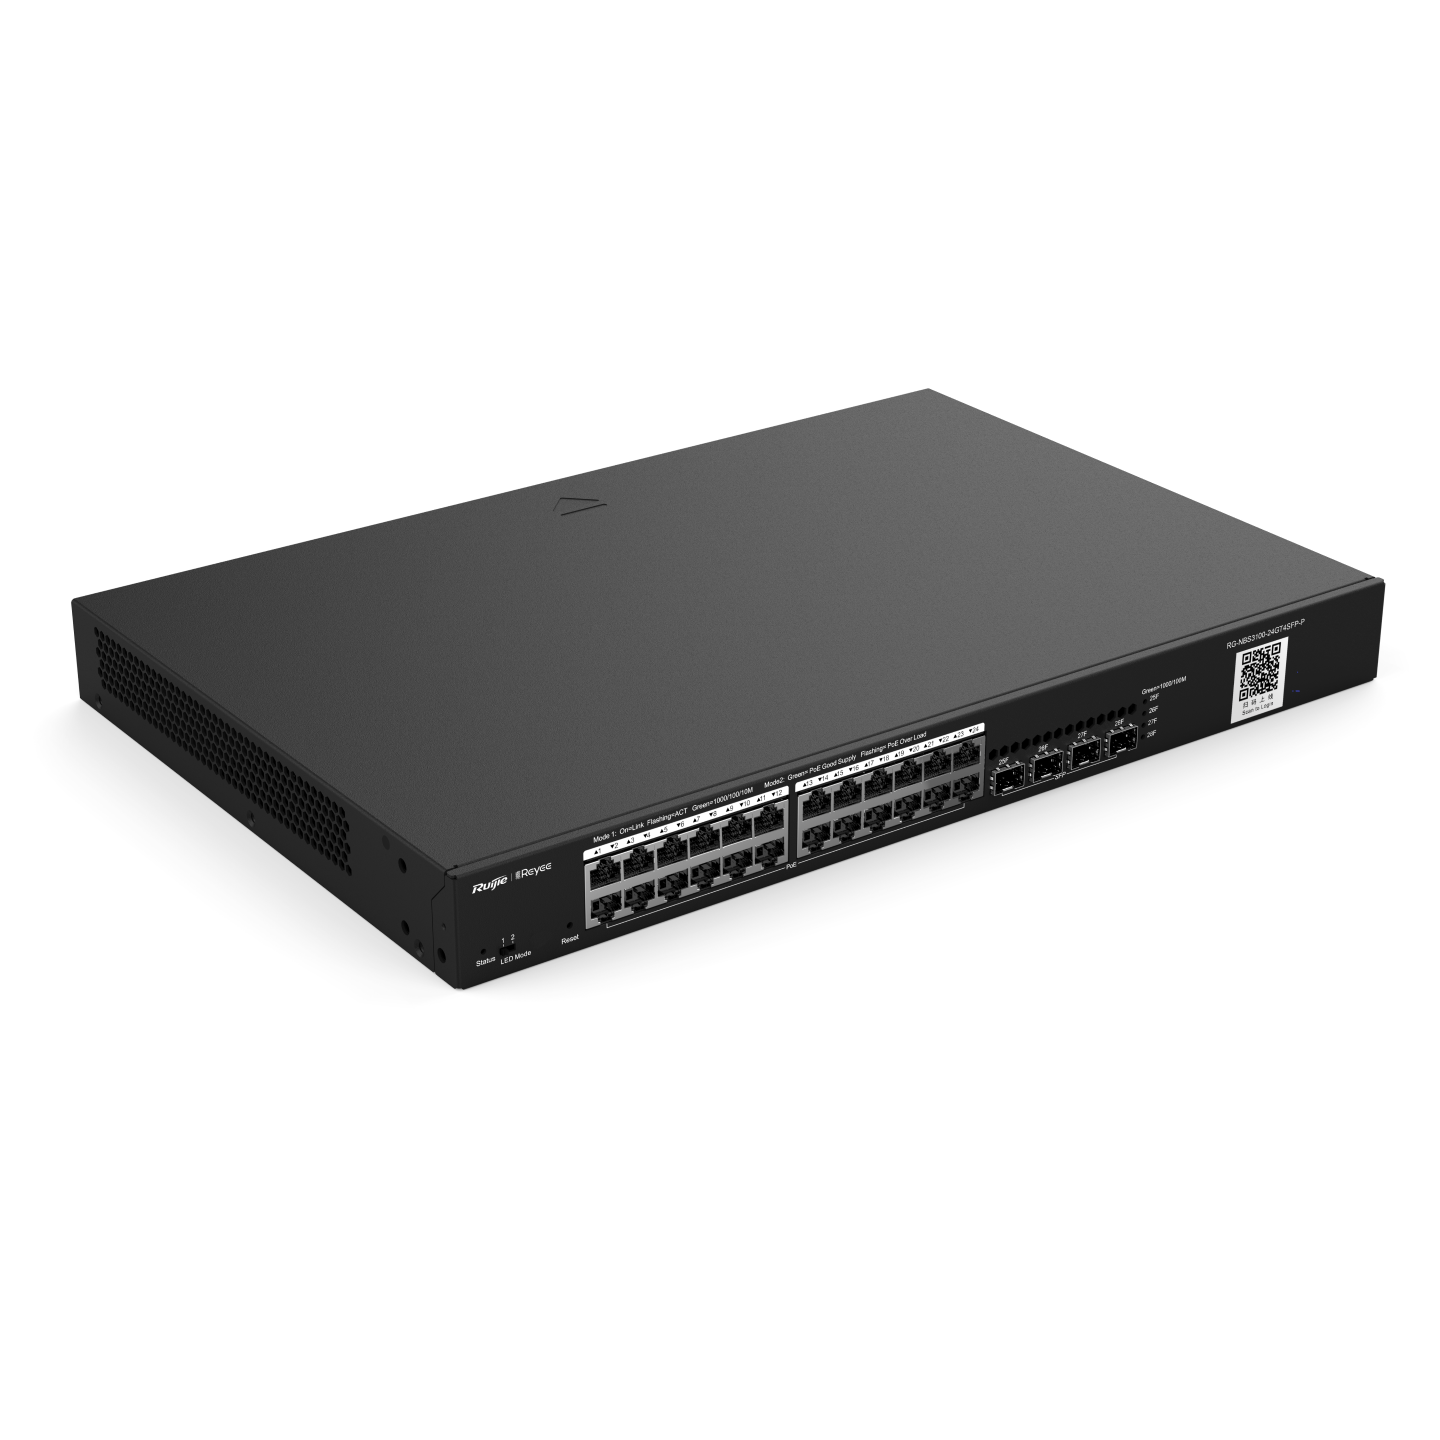 Reyee RG-NBS3100-24GT4SFP-P, 24 Port Giga POE+ 370W with 4 SFP Port, Layer 2 Cloud Managed Switch